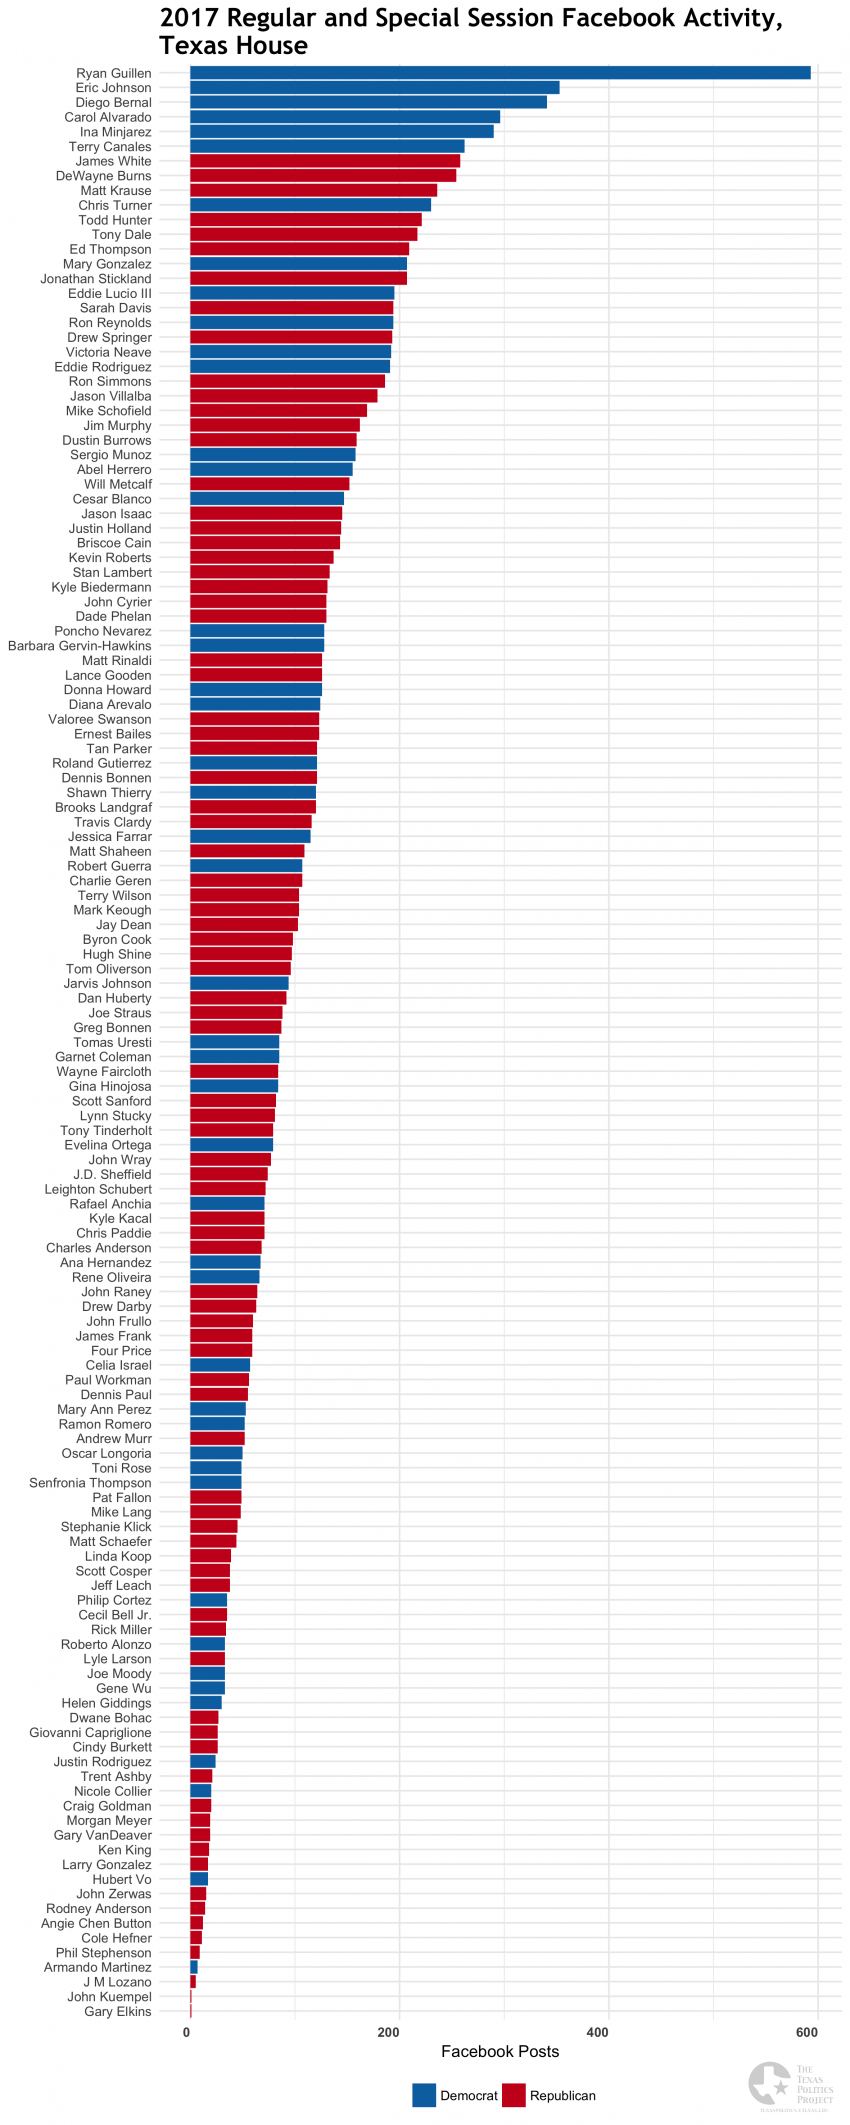 2017 Legislative Session, Texas House Facebook Posting Frequency, All Members